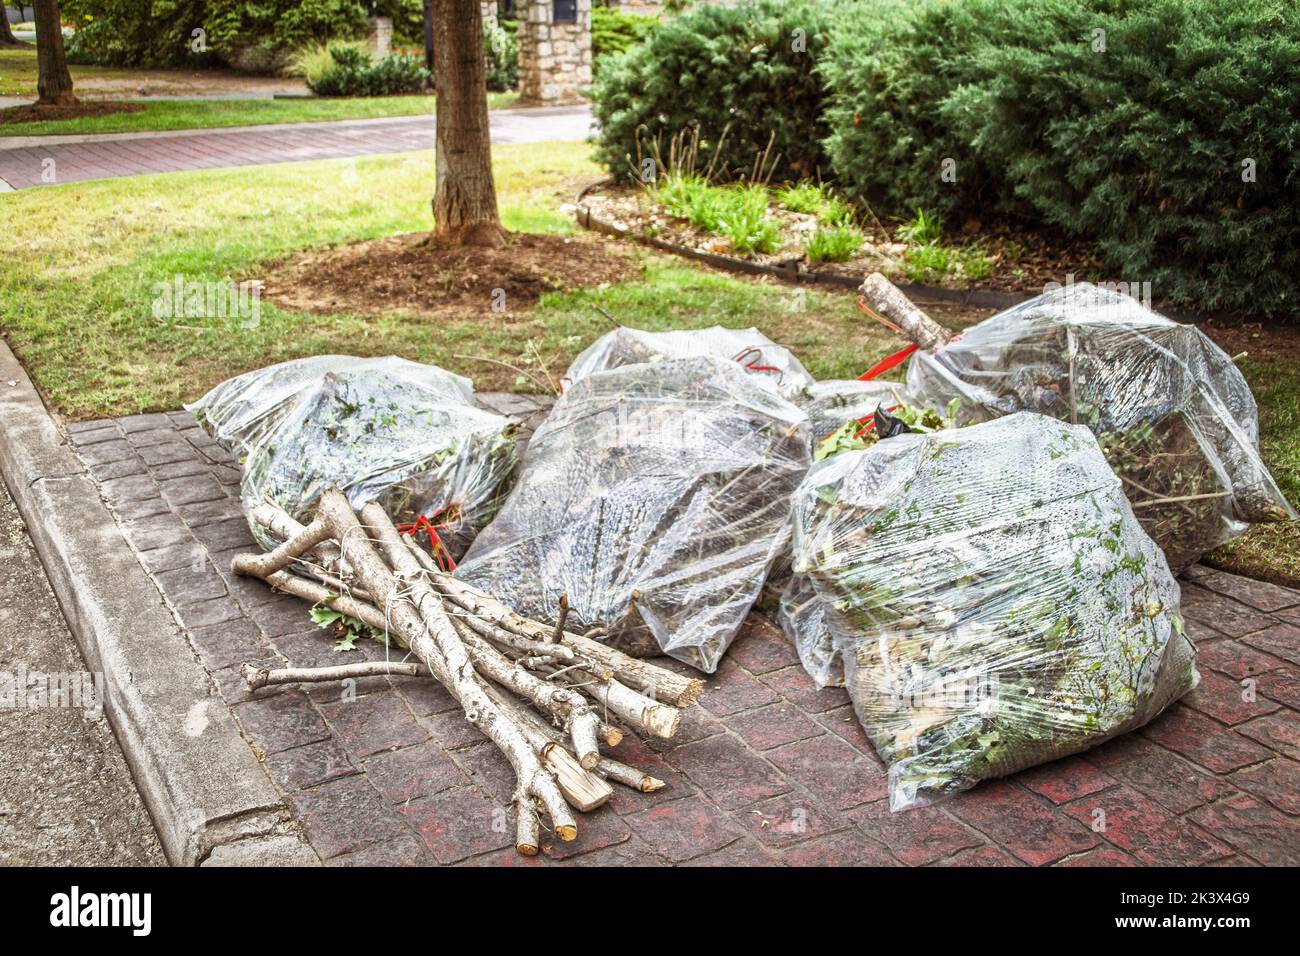 Clear plastic bags from yard cleanup piled at curb for pickup along with cut sticks tied together Stock Photo